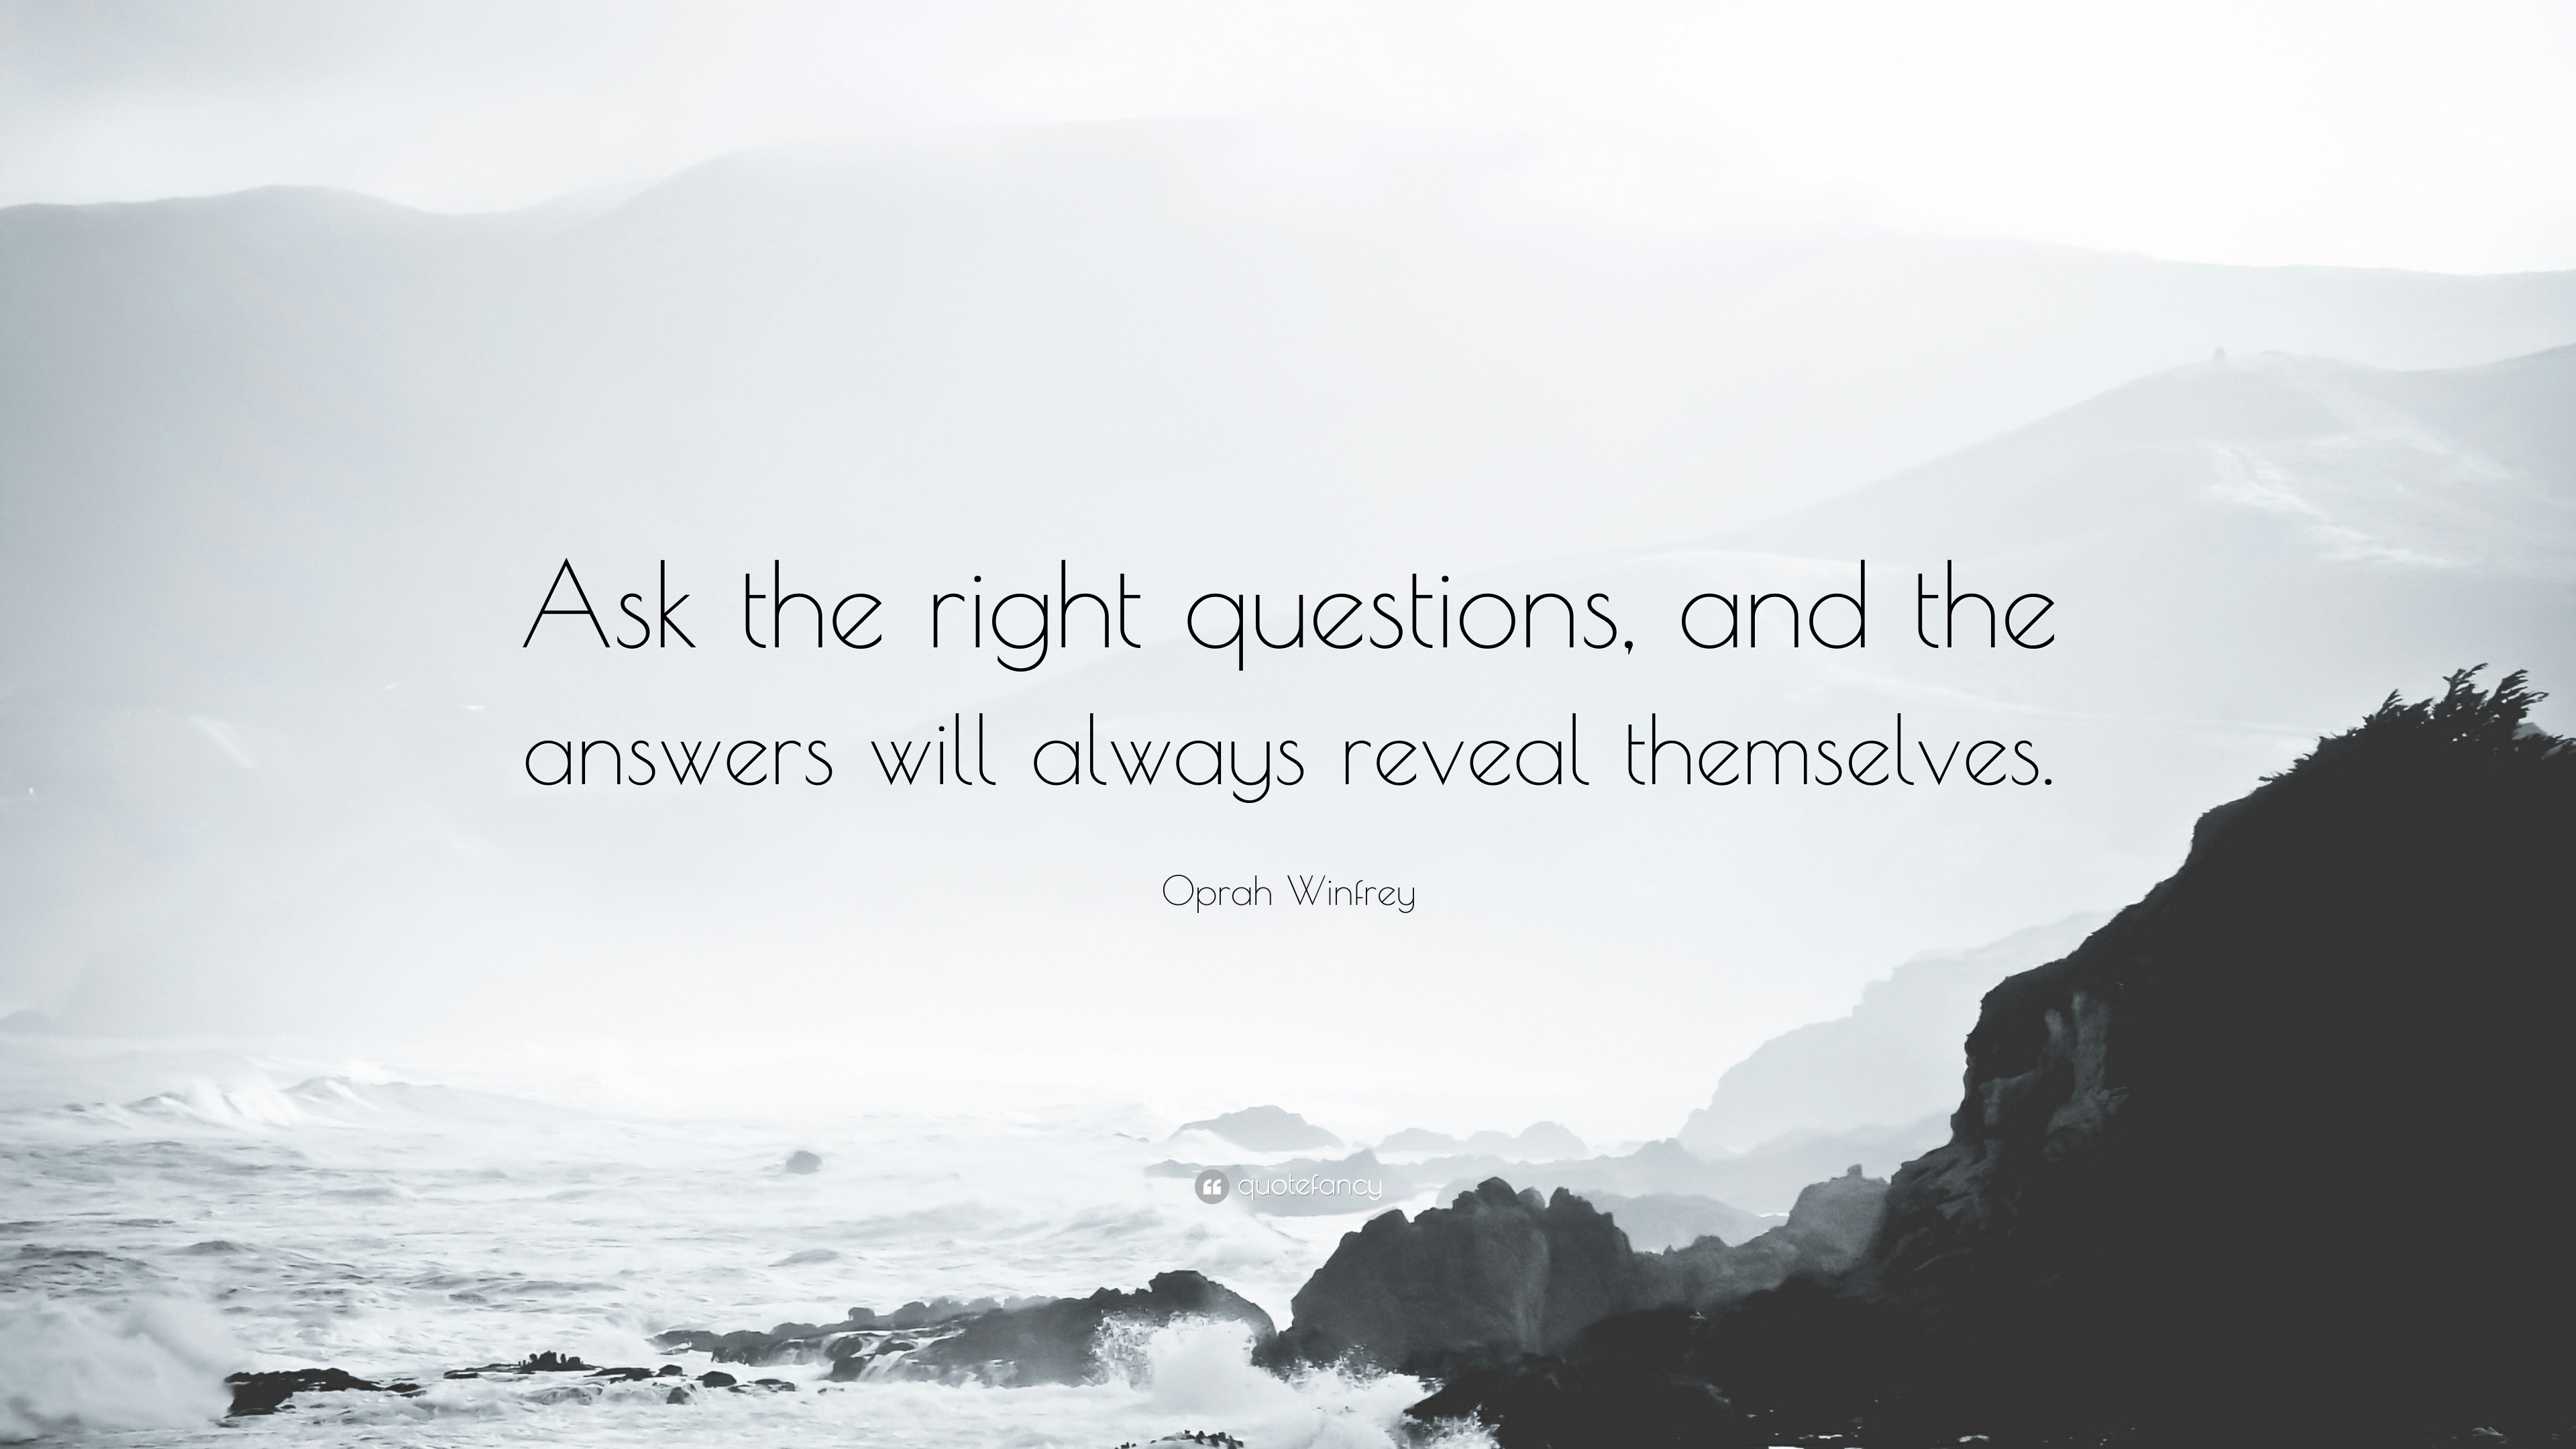 oprah-winfrey-quote-ask-the-right-questions-and-the-answers-will-always-reveal-themselves